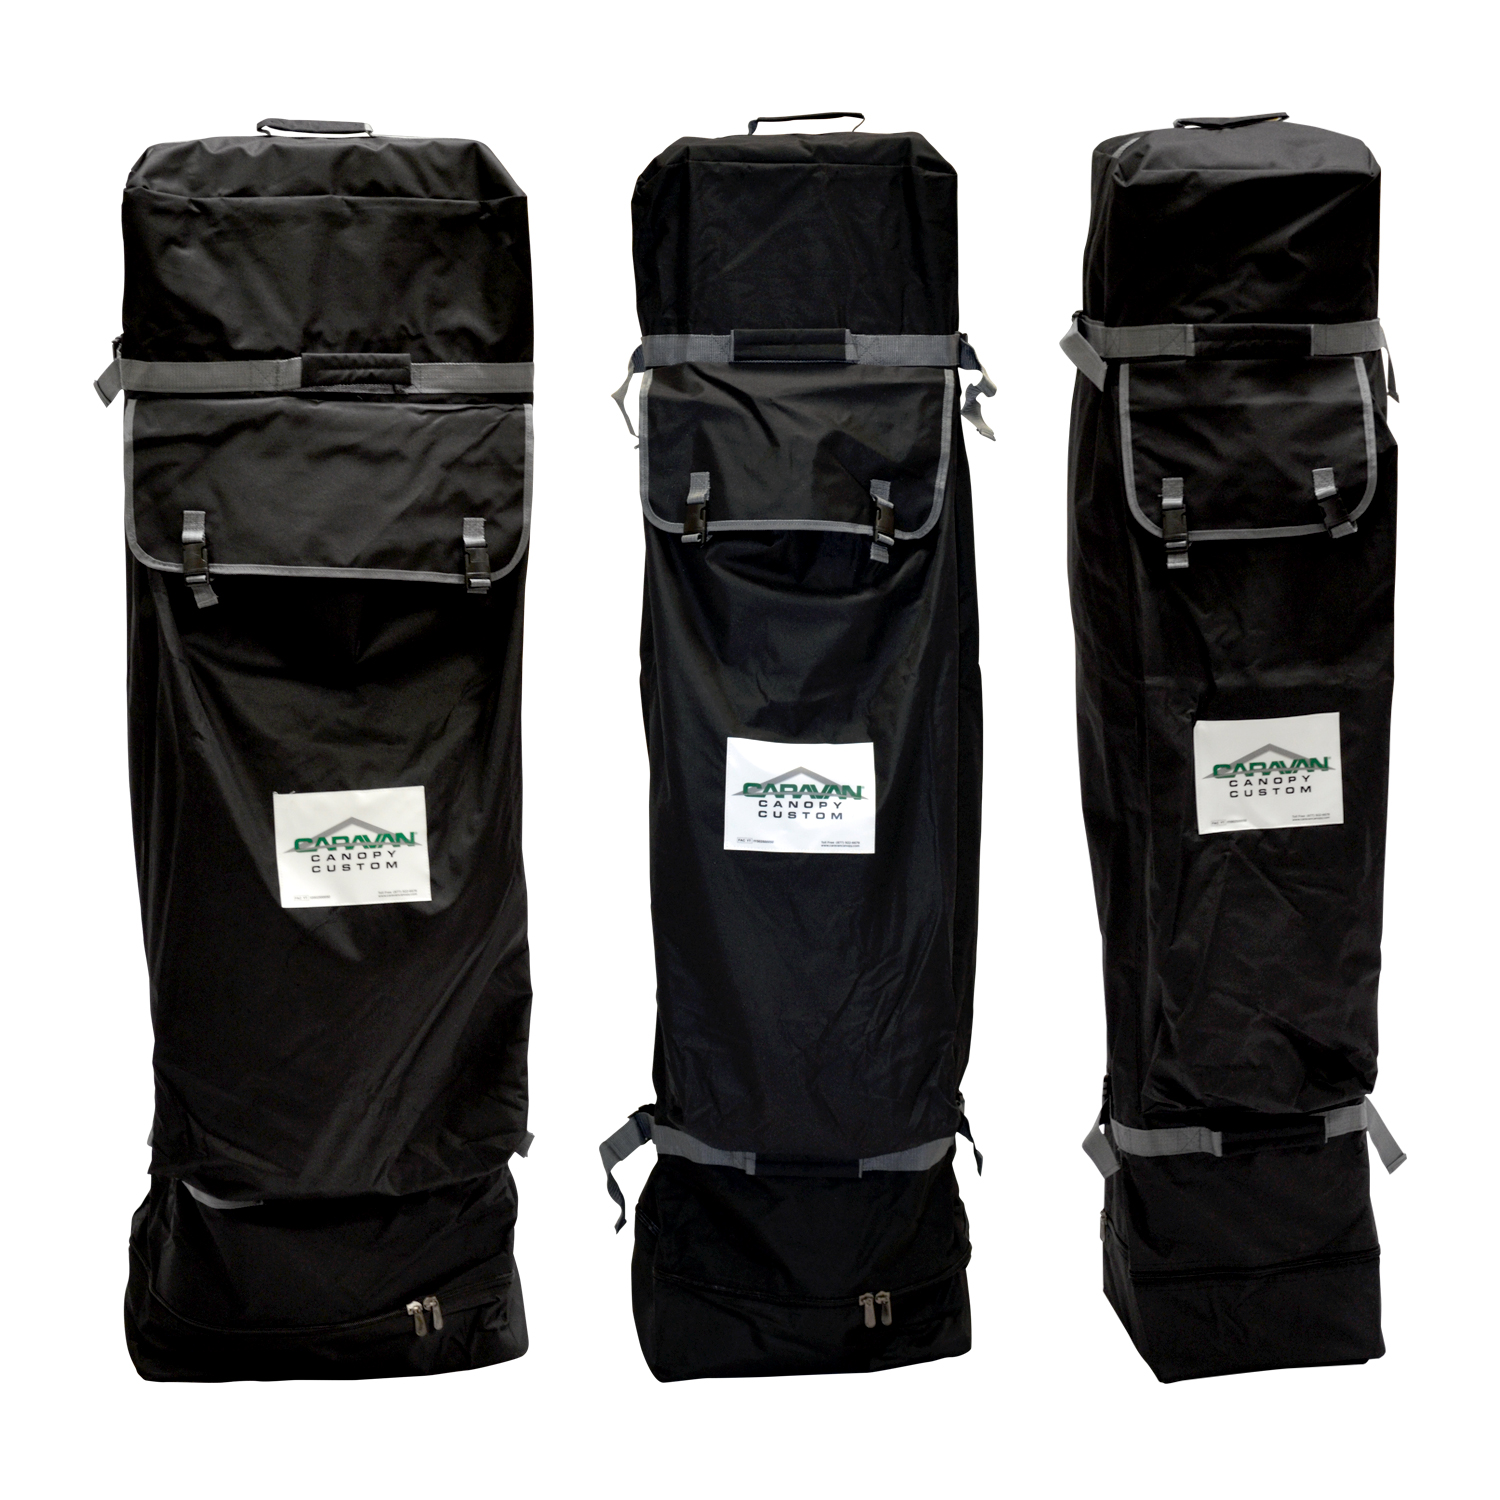 Genuine Canopy BRAND Roller Bag With Wheels for 10x10 Plus Accessories for sale online 